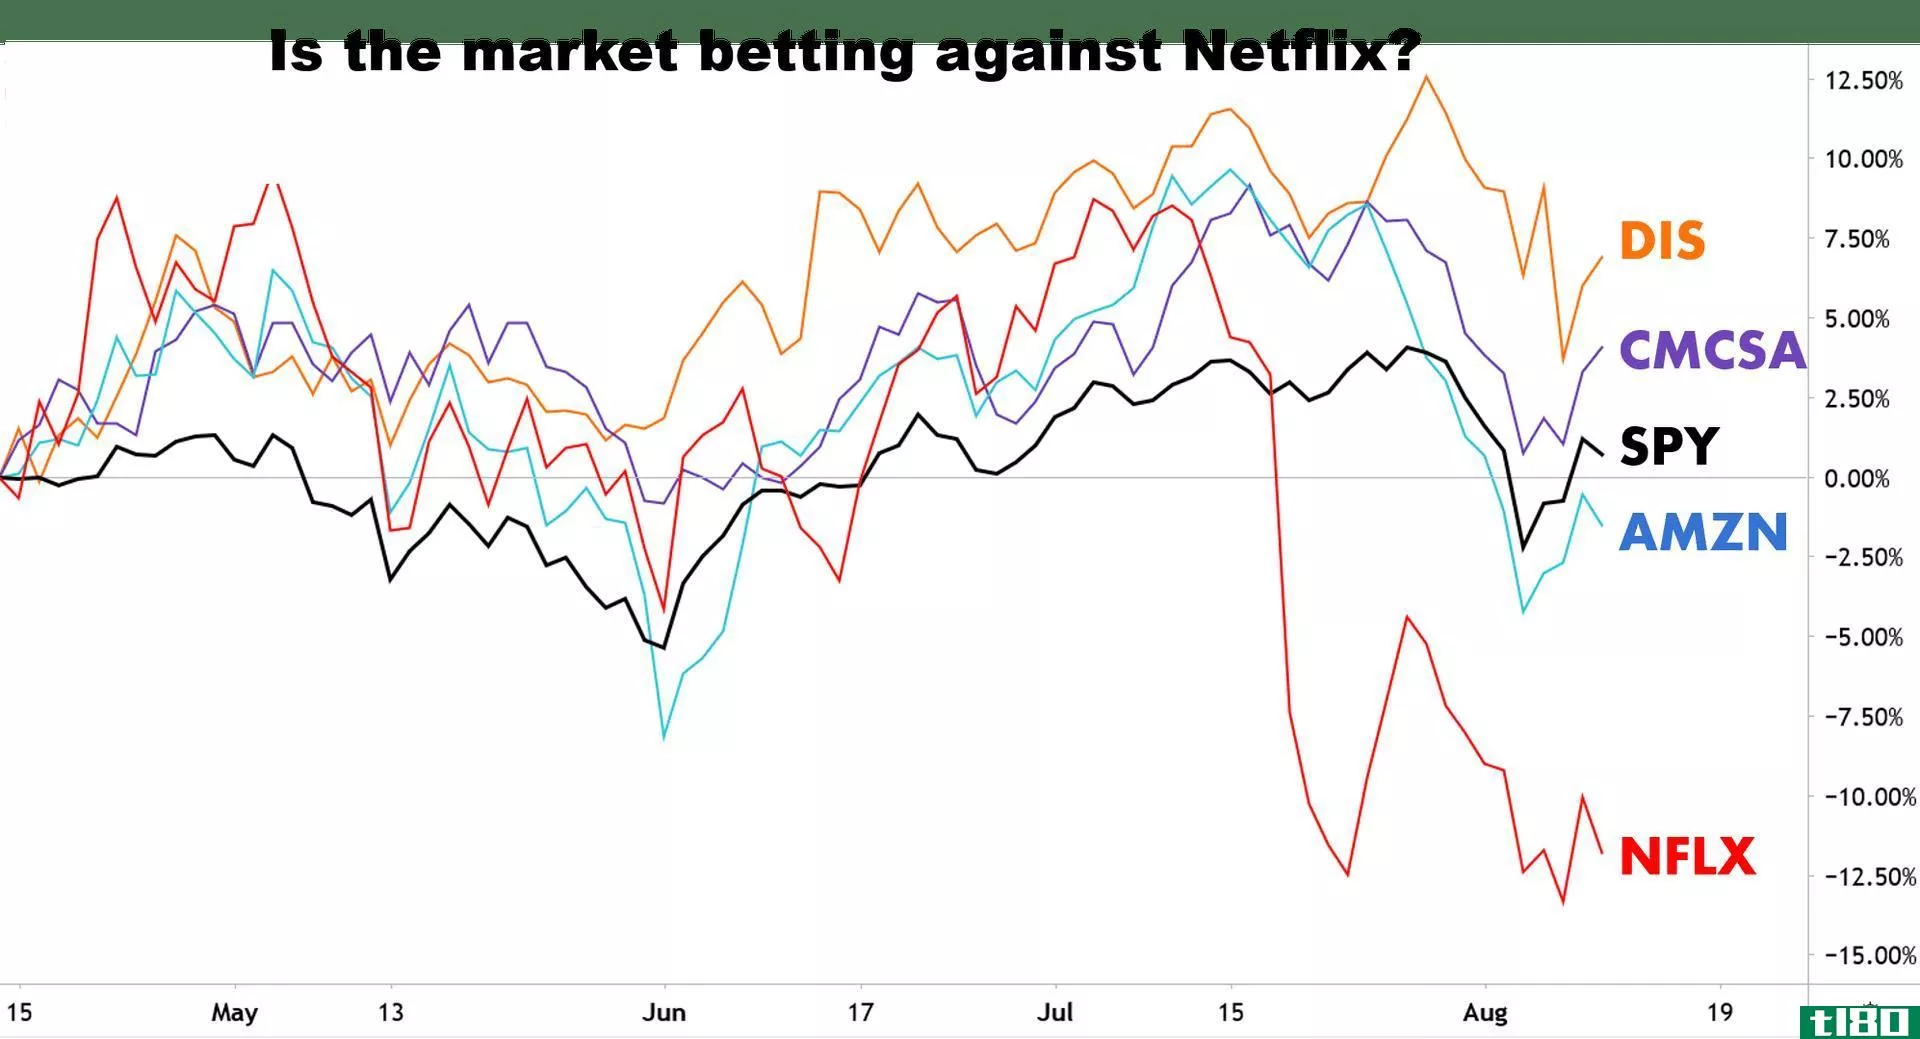 Chart showing the share price performance of Netflix, Inc. (NFLX) vs. compe*****s